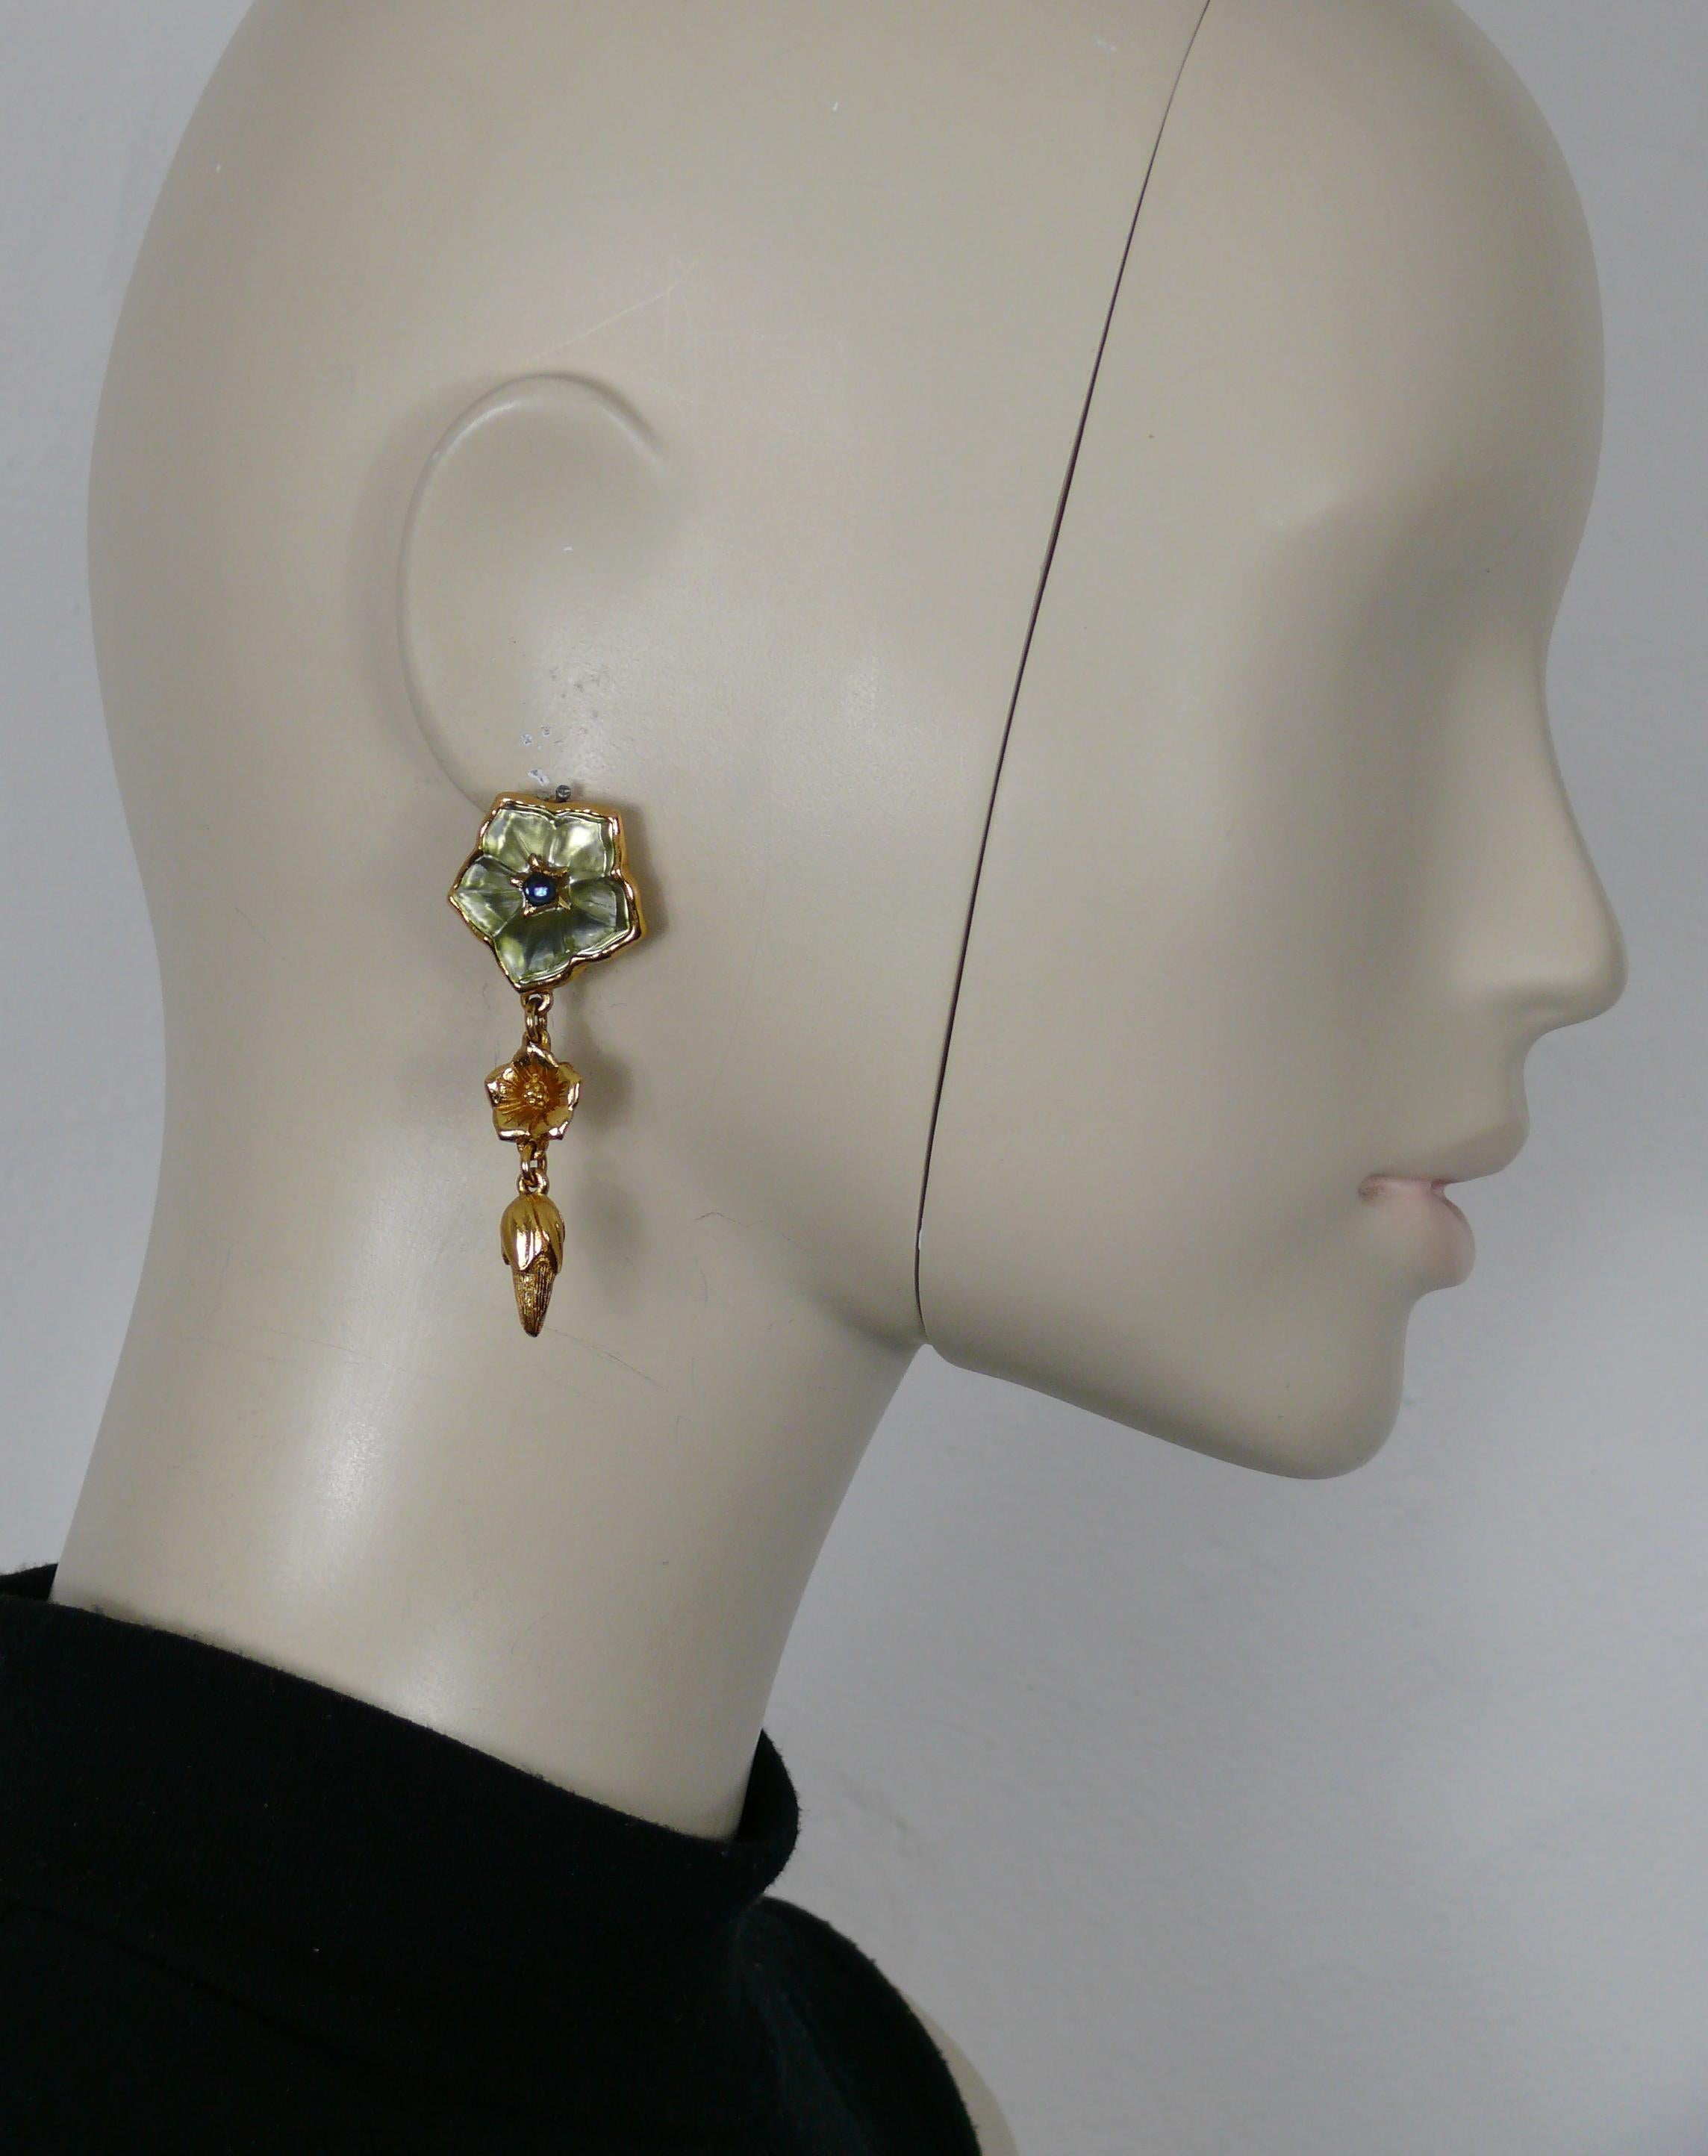 KENZO vintage gold tone floral dangling earrings (clip-on) featuring a resin flower top, gold tone flower and blossom.

Embossed KENZO Paris Made in France.

Indicative measurements : height approx. 6 cm (2.36 inches) / max. width approx. 2.5 cm